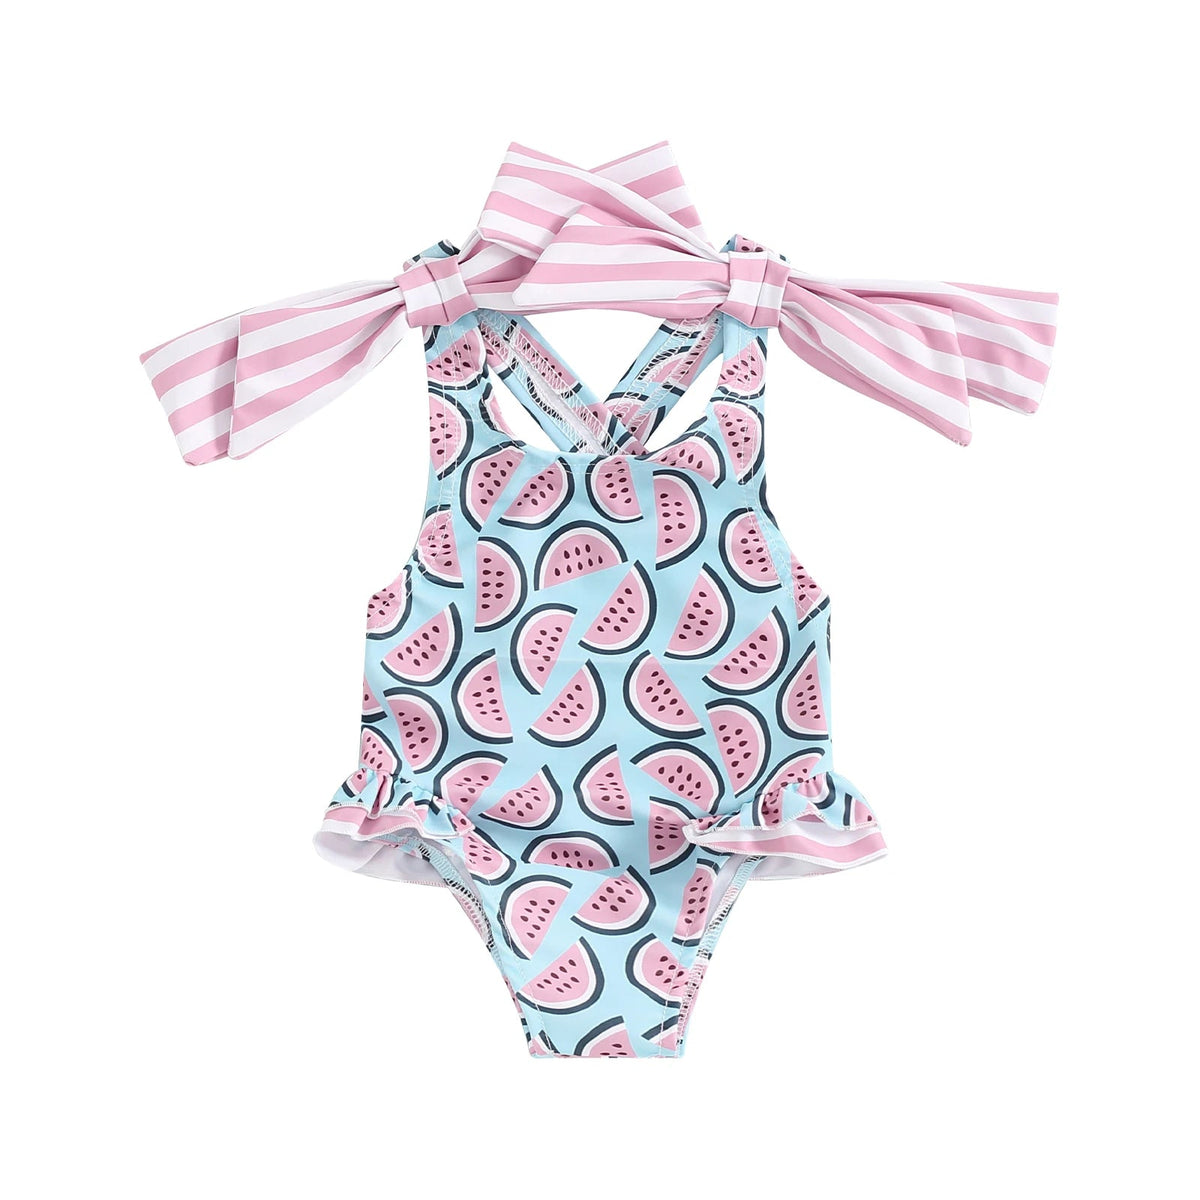 Bowknot Ruffles Swimsuit - The Ollie Bee